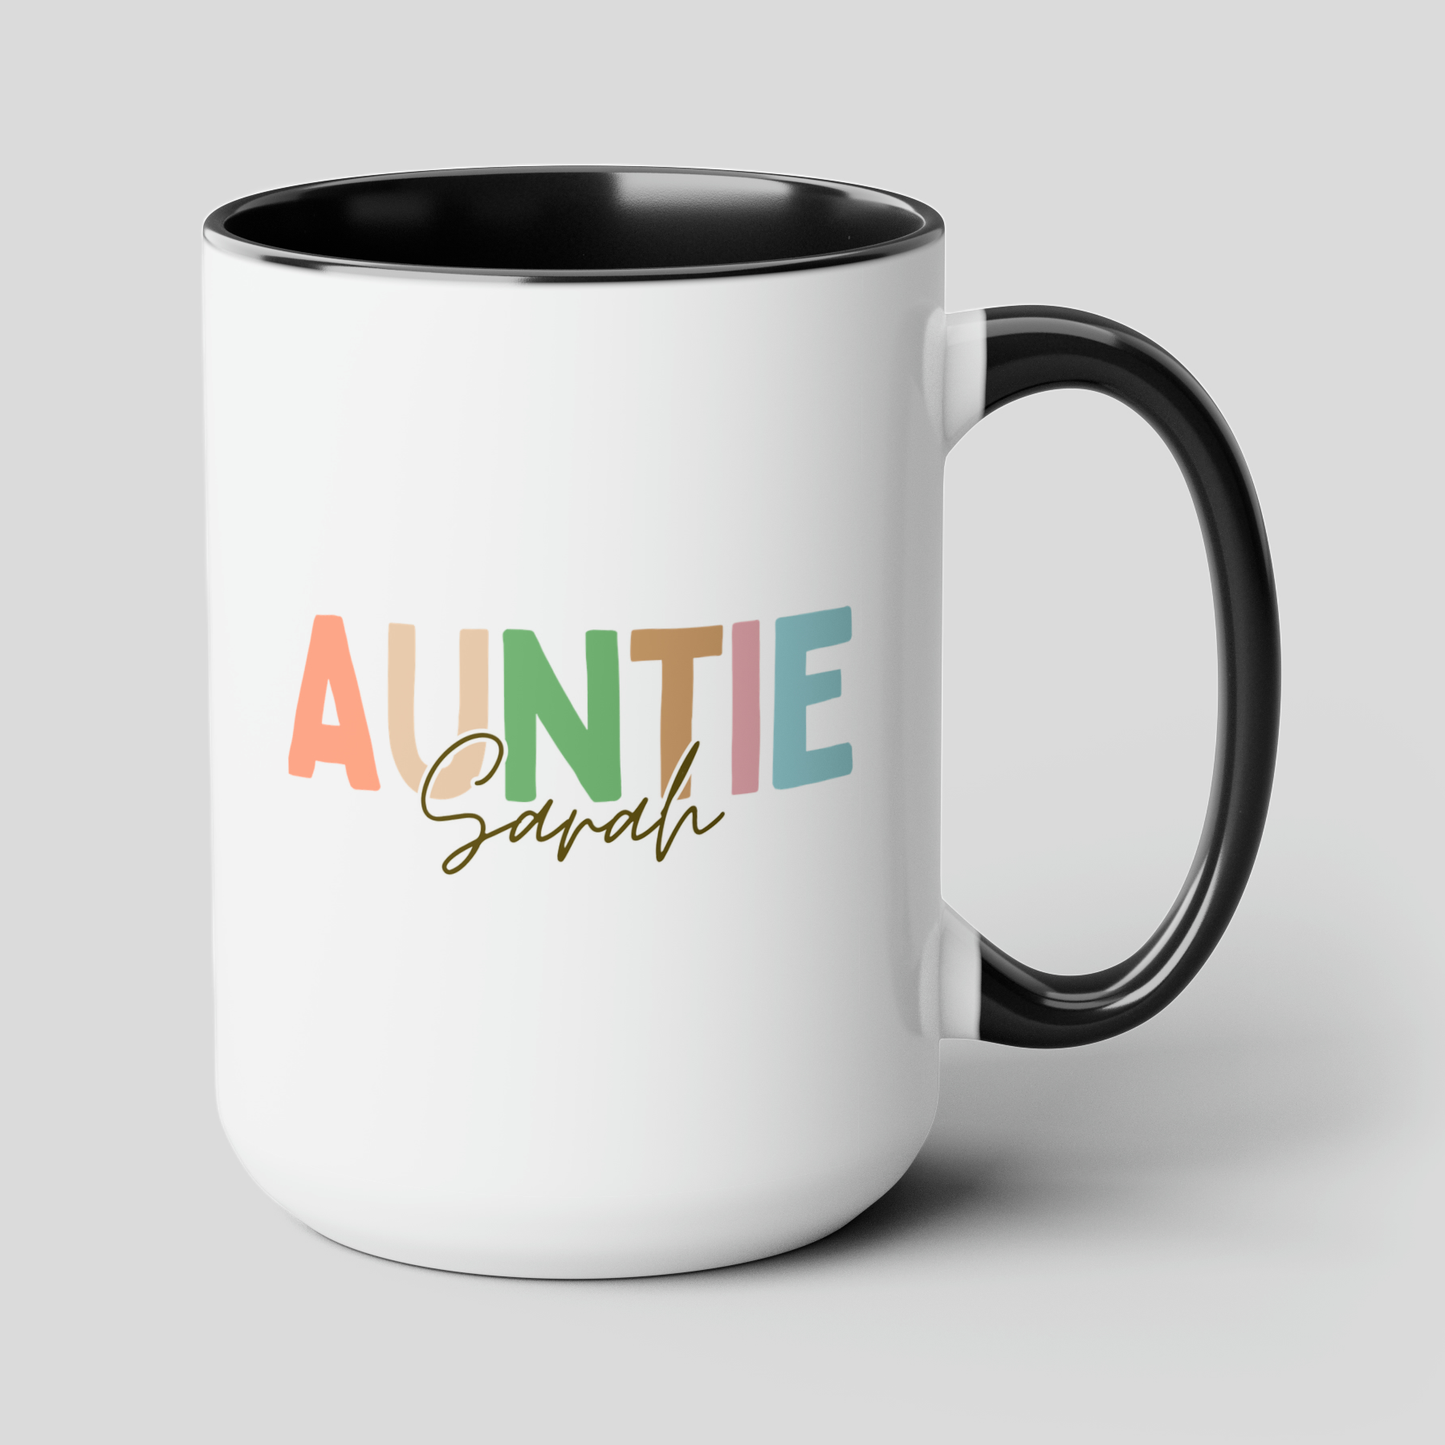 Auntie Name 15oz white with black accent funny large coffee mug gift for aunt mothers day birthday cool fun funtie custom name personalize waveywares wavey wares wavywares wavy wares cover